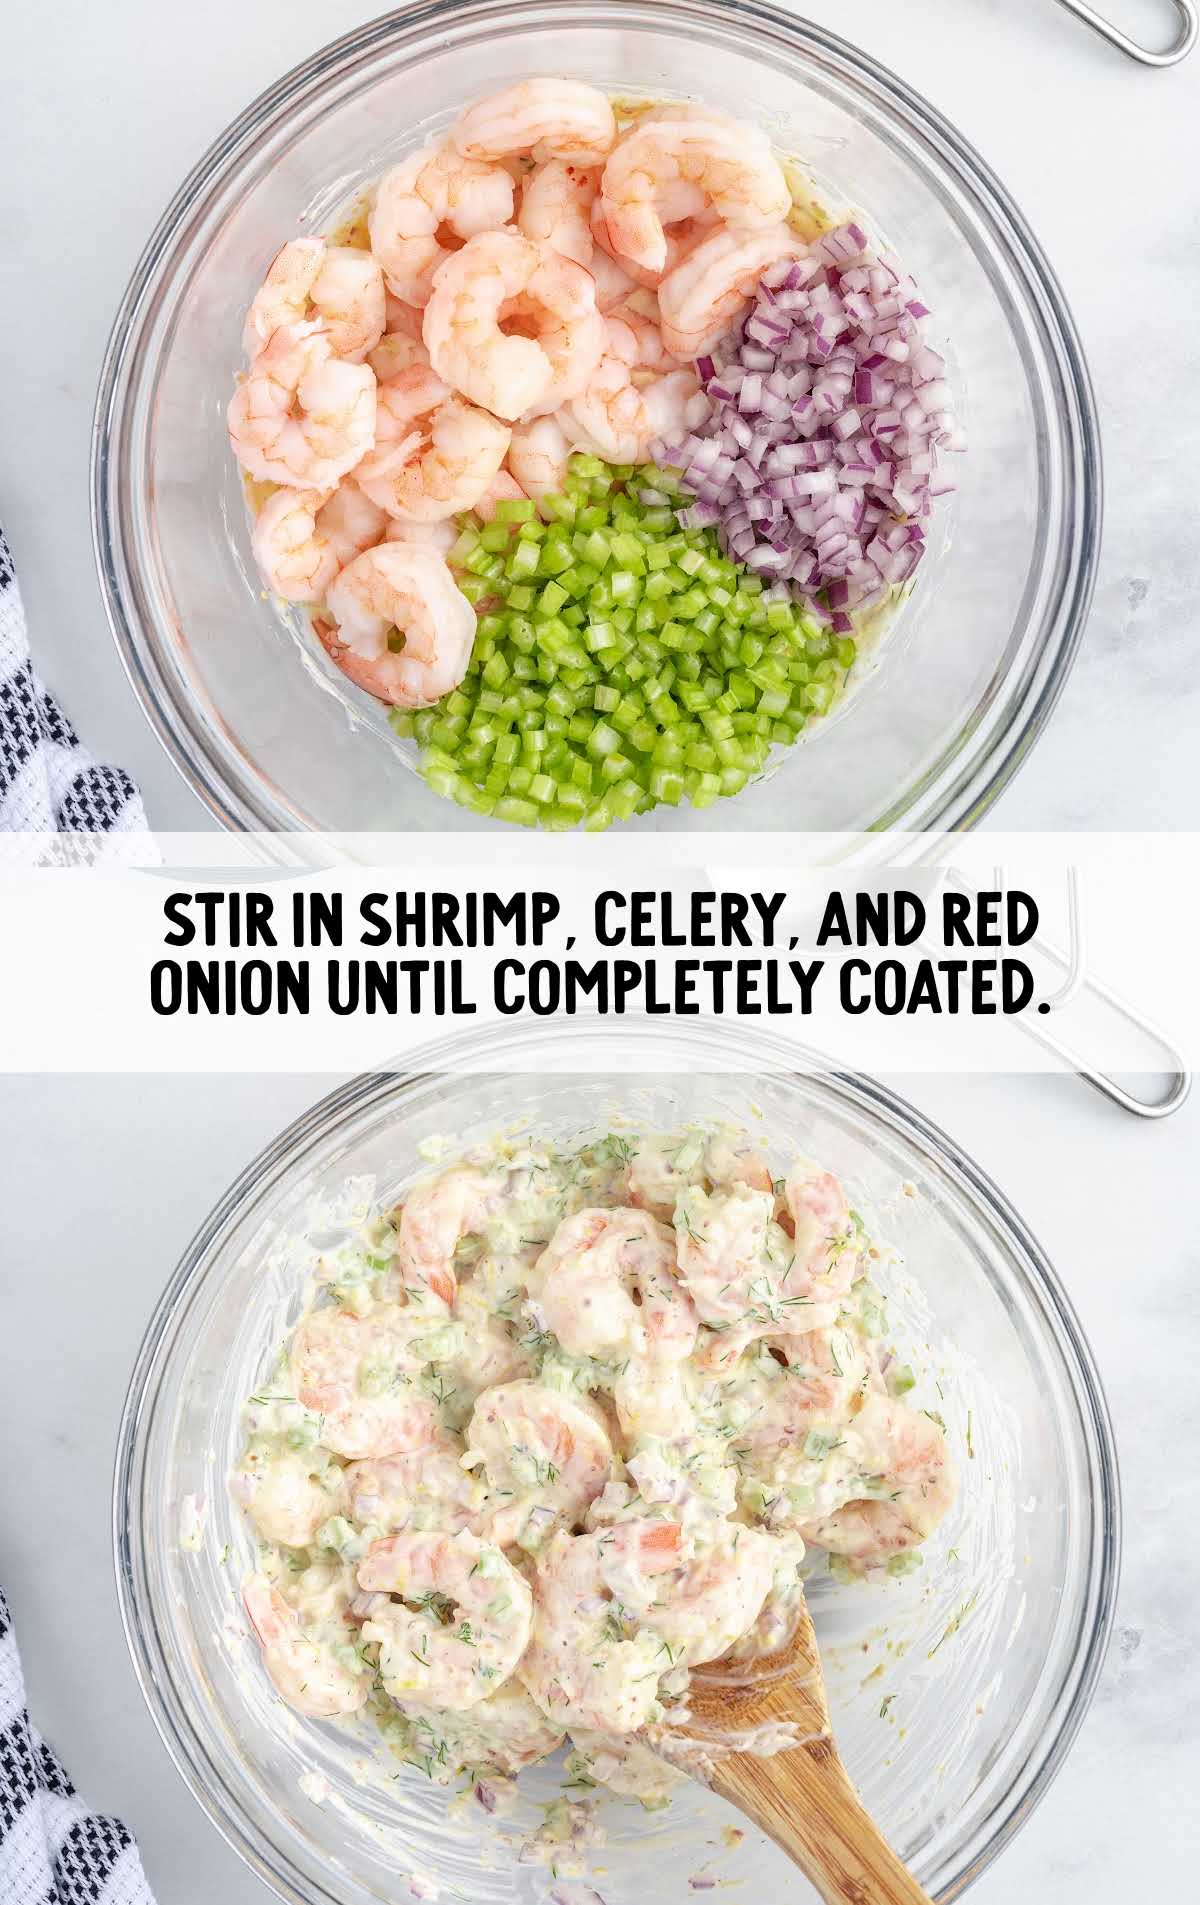 shrimp, celery, and red onions folded in a bowl